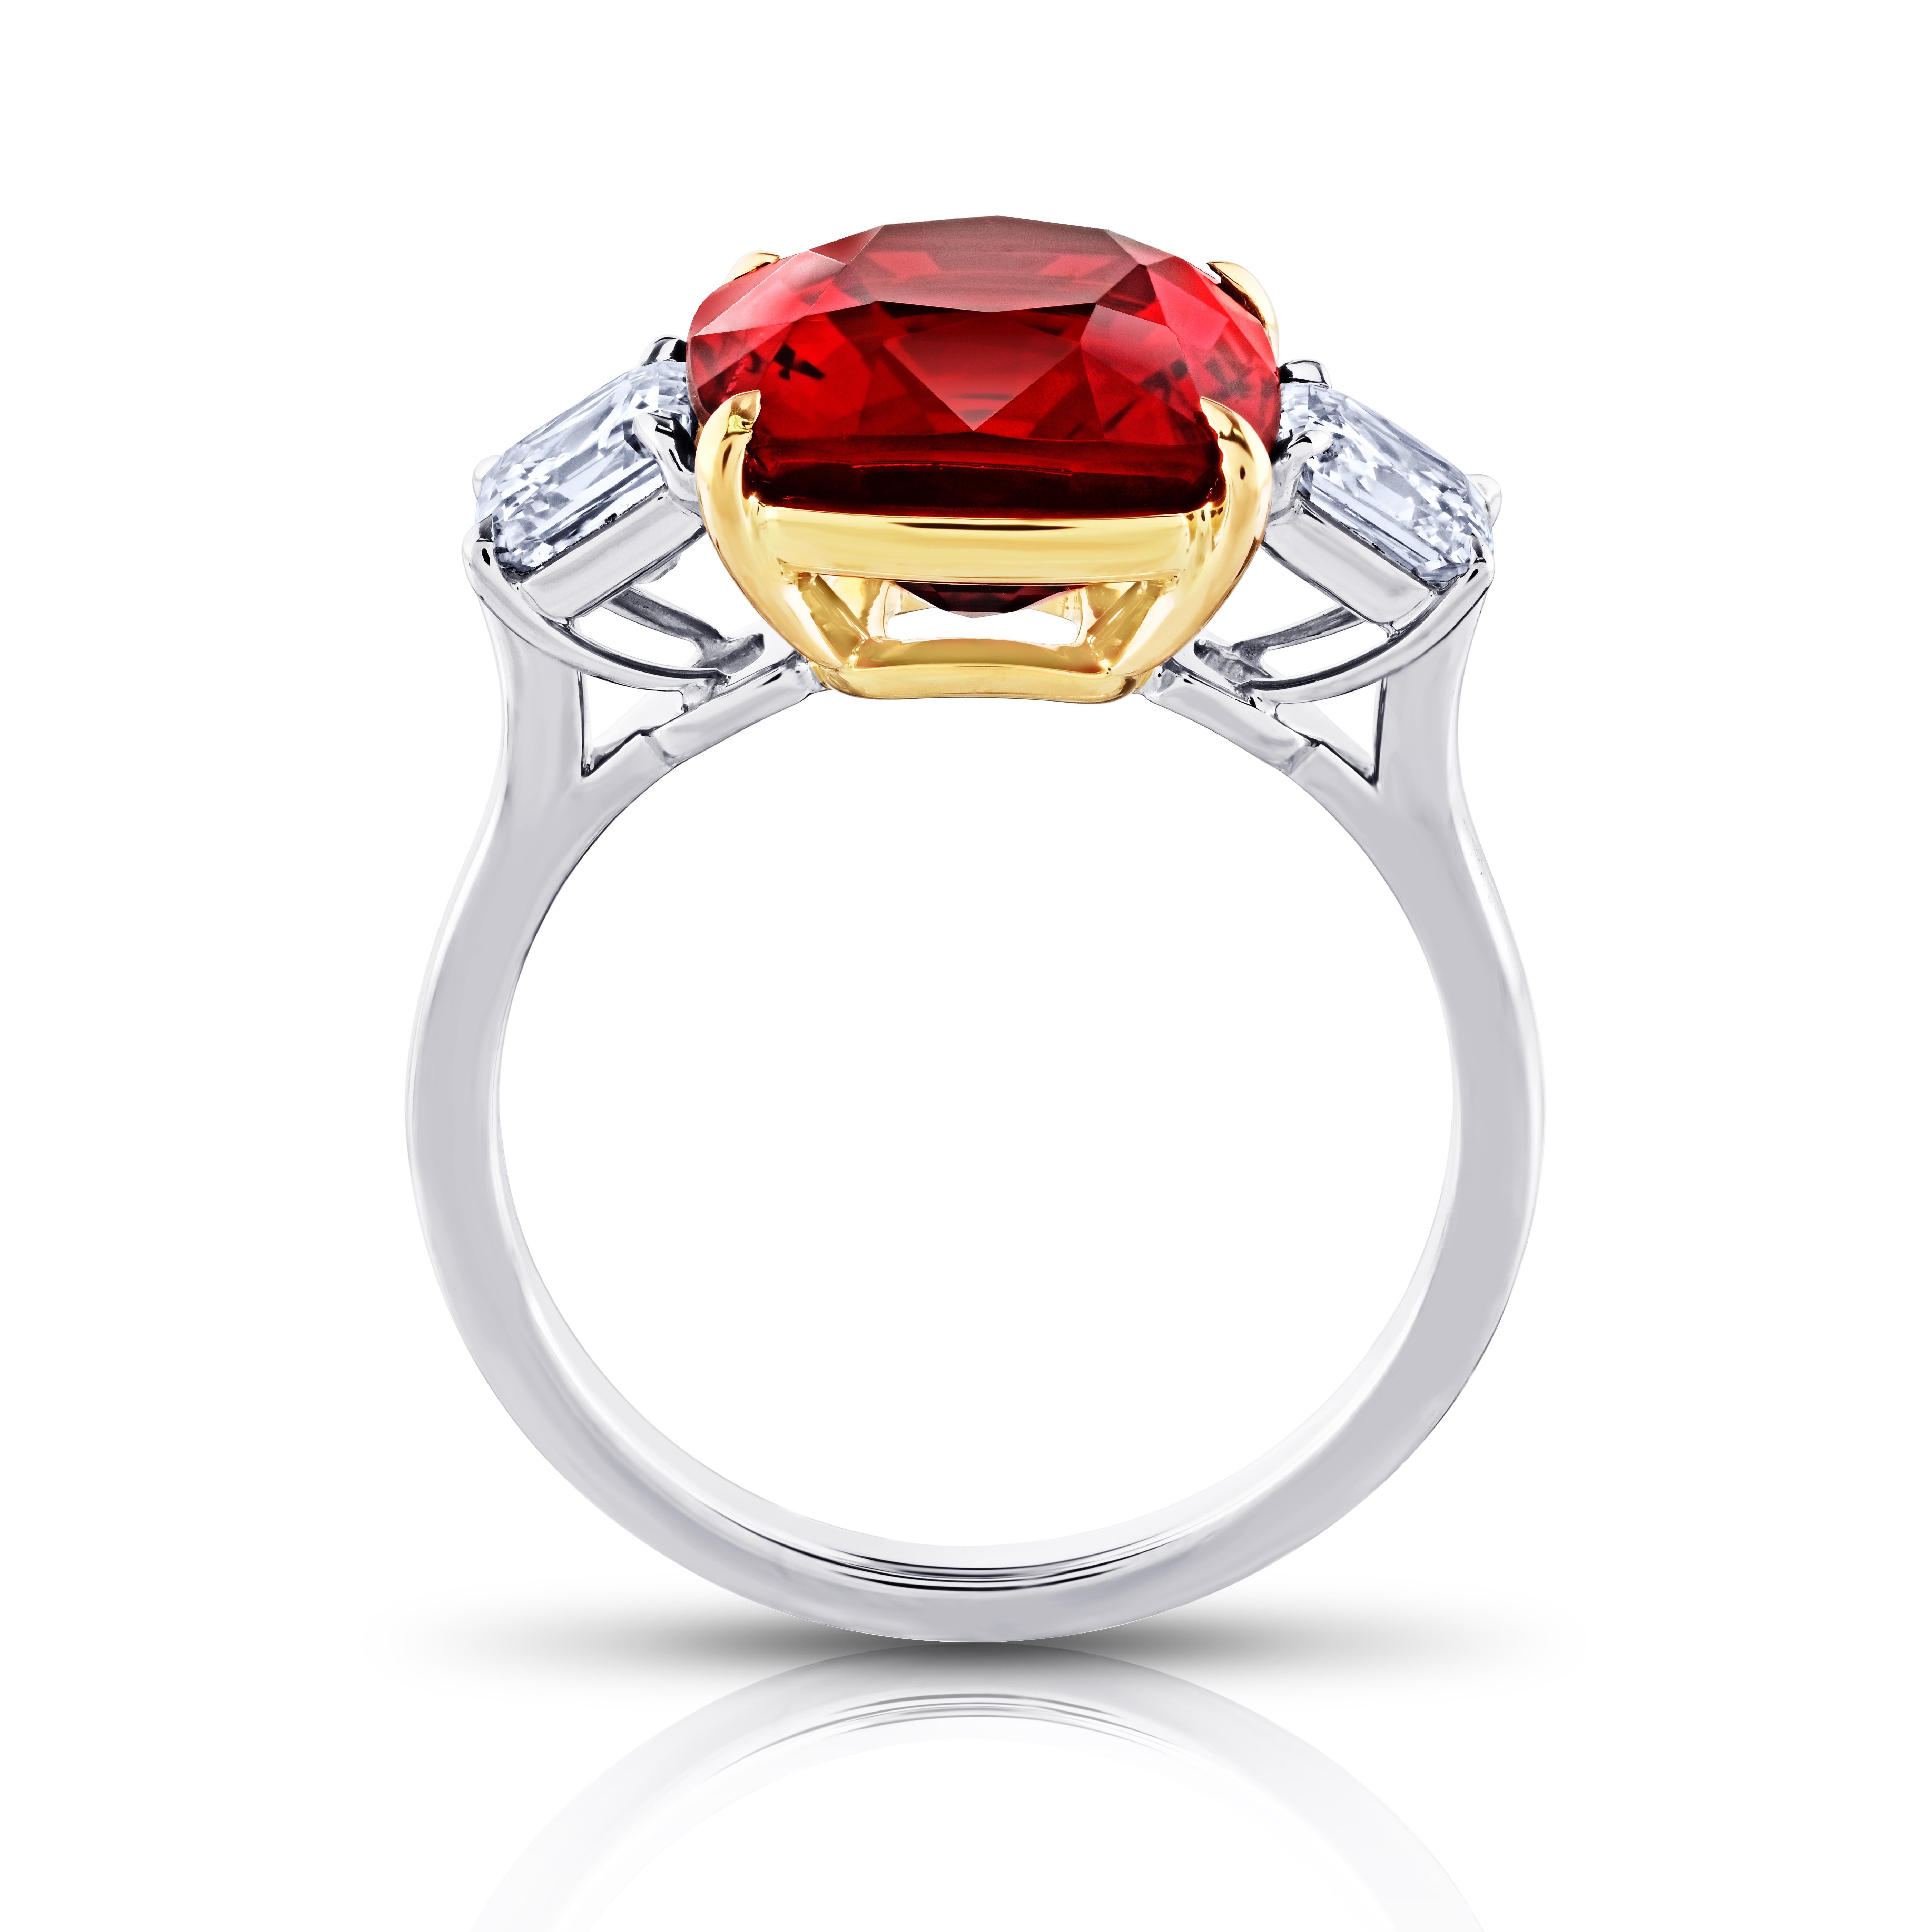 Contemporary 6.39 Carat Cushion Red Spinel and Diamond Platinum Ring